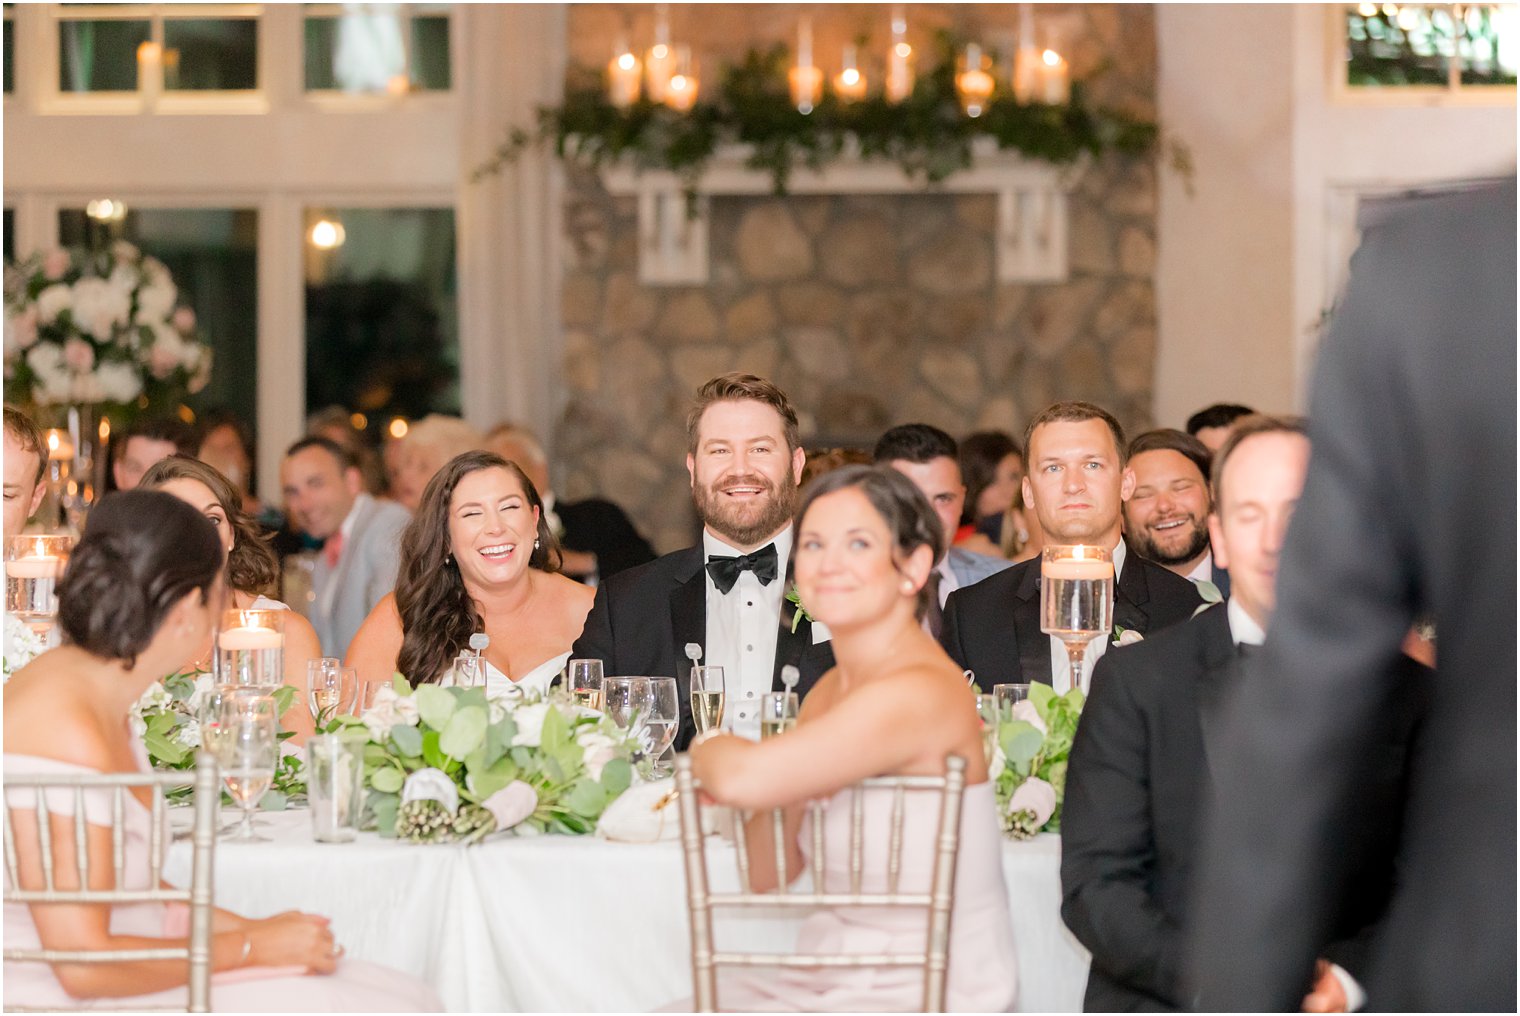 Bride and groom laughing at toasts during wedding reception 